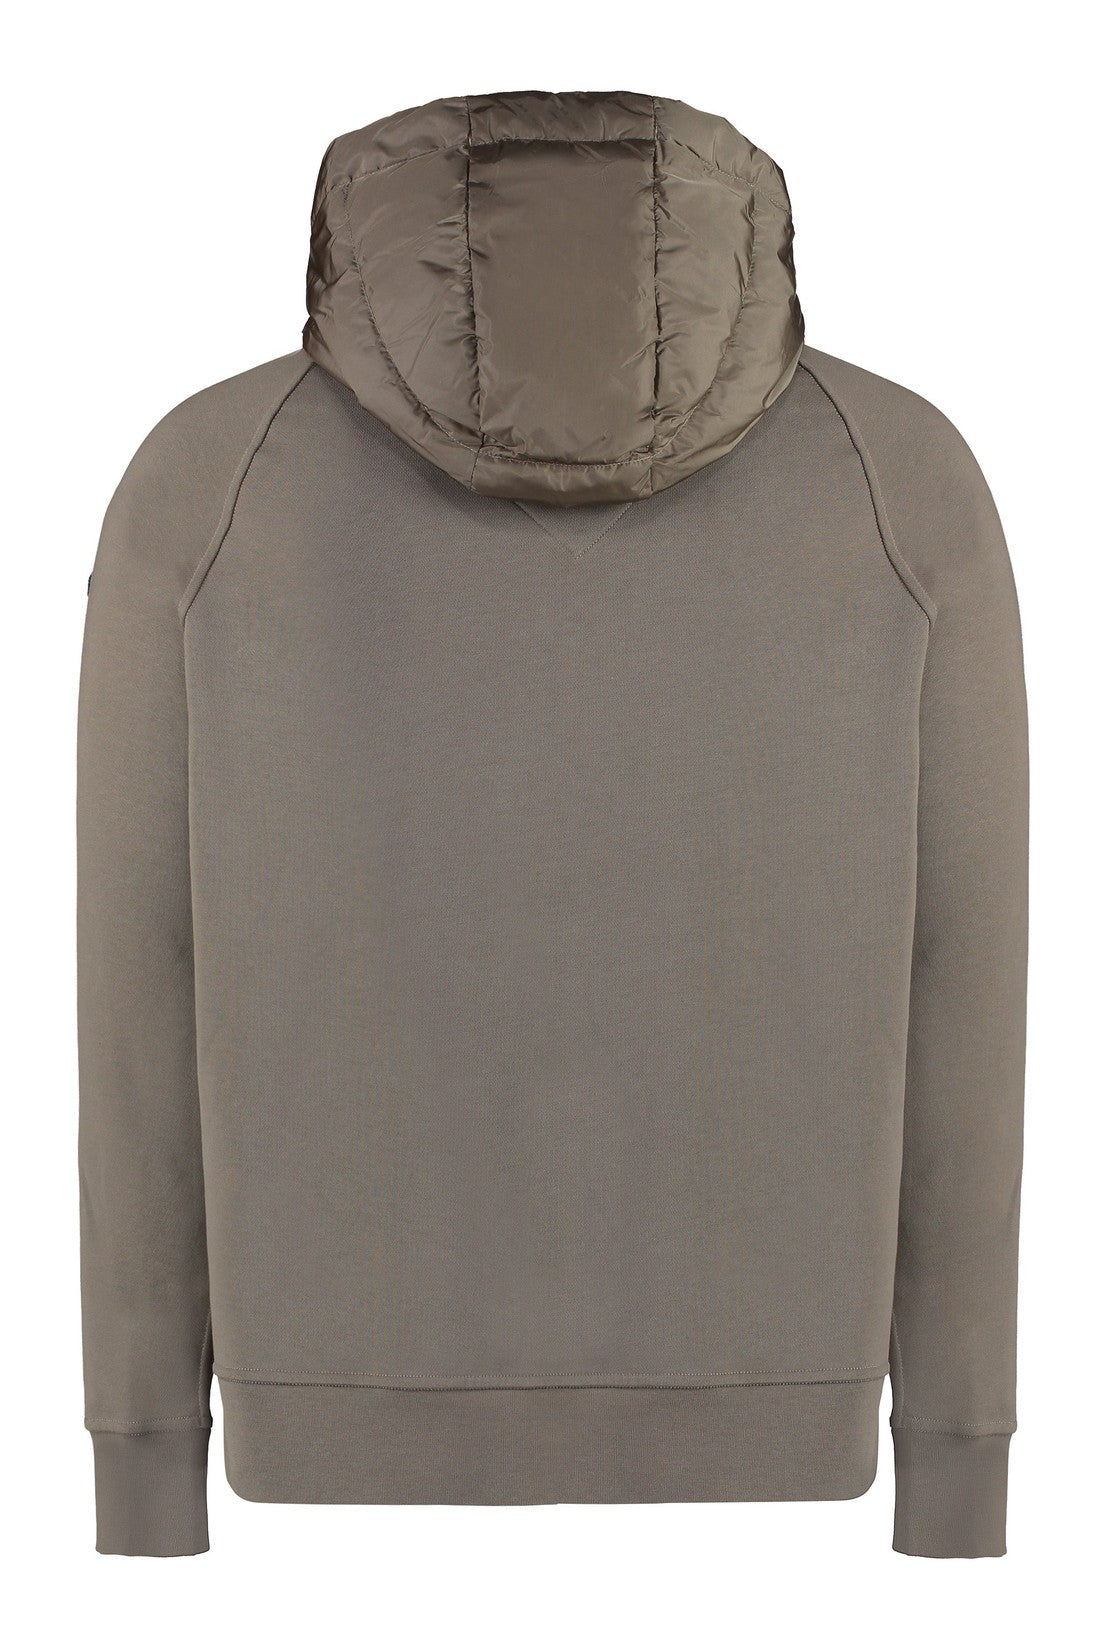 Canada Goose-OUTLET-SALE-Hybridge padded panel hoodie-ARCHIVIST